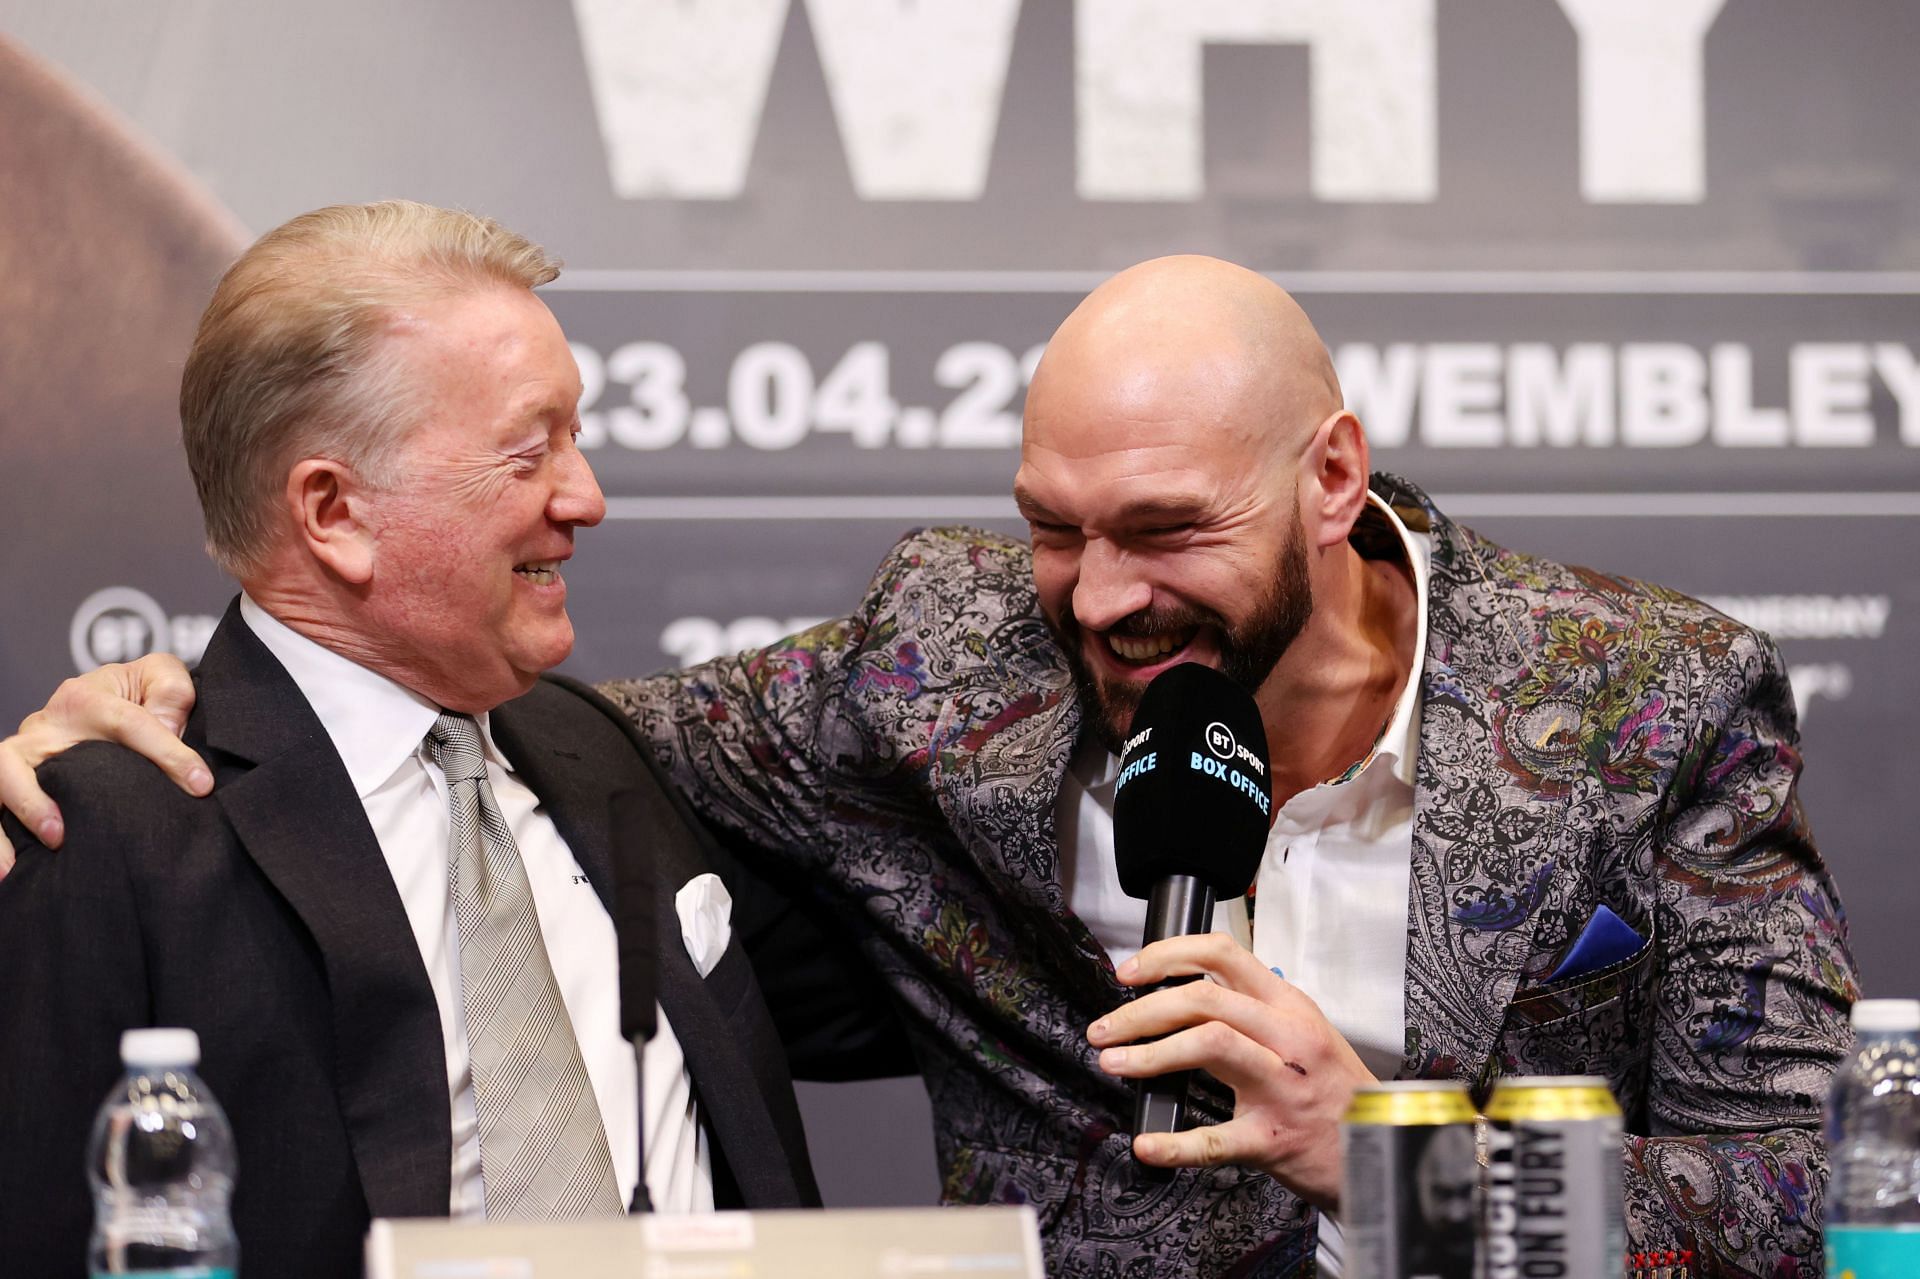 Frank Warren (L) will have to pay up to Tyson Fury (R) for him to return to the boxing ring.